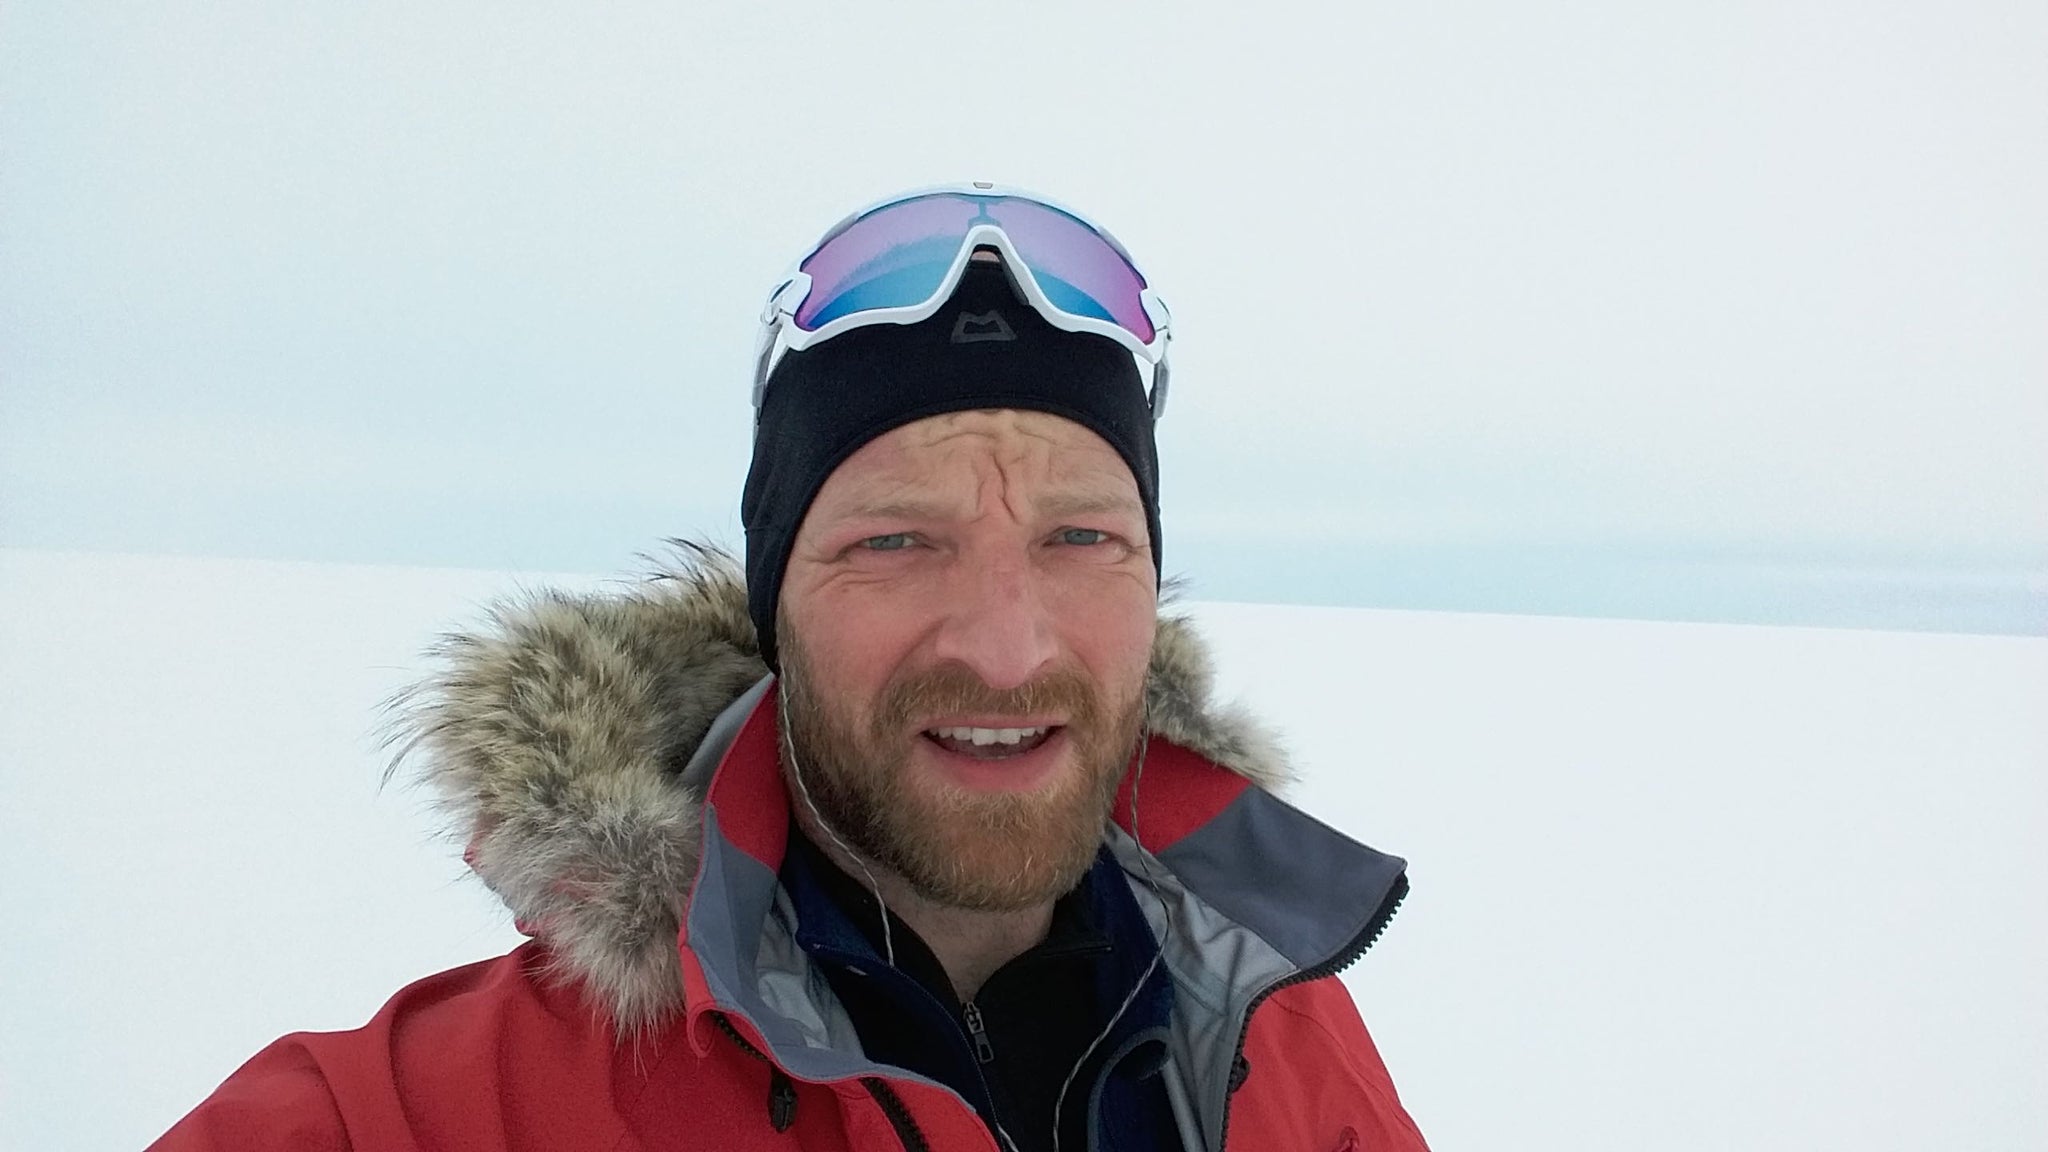 Polar explorer Ben Saunders explains why he takes FLARES® PRO earphones on his expeditions.